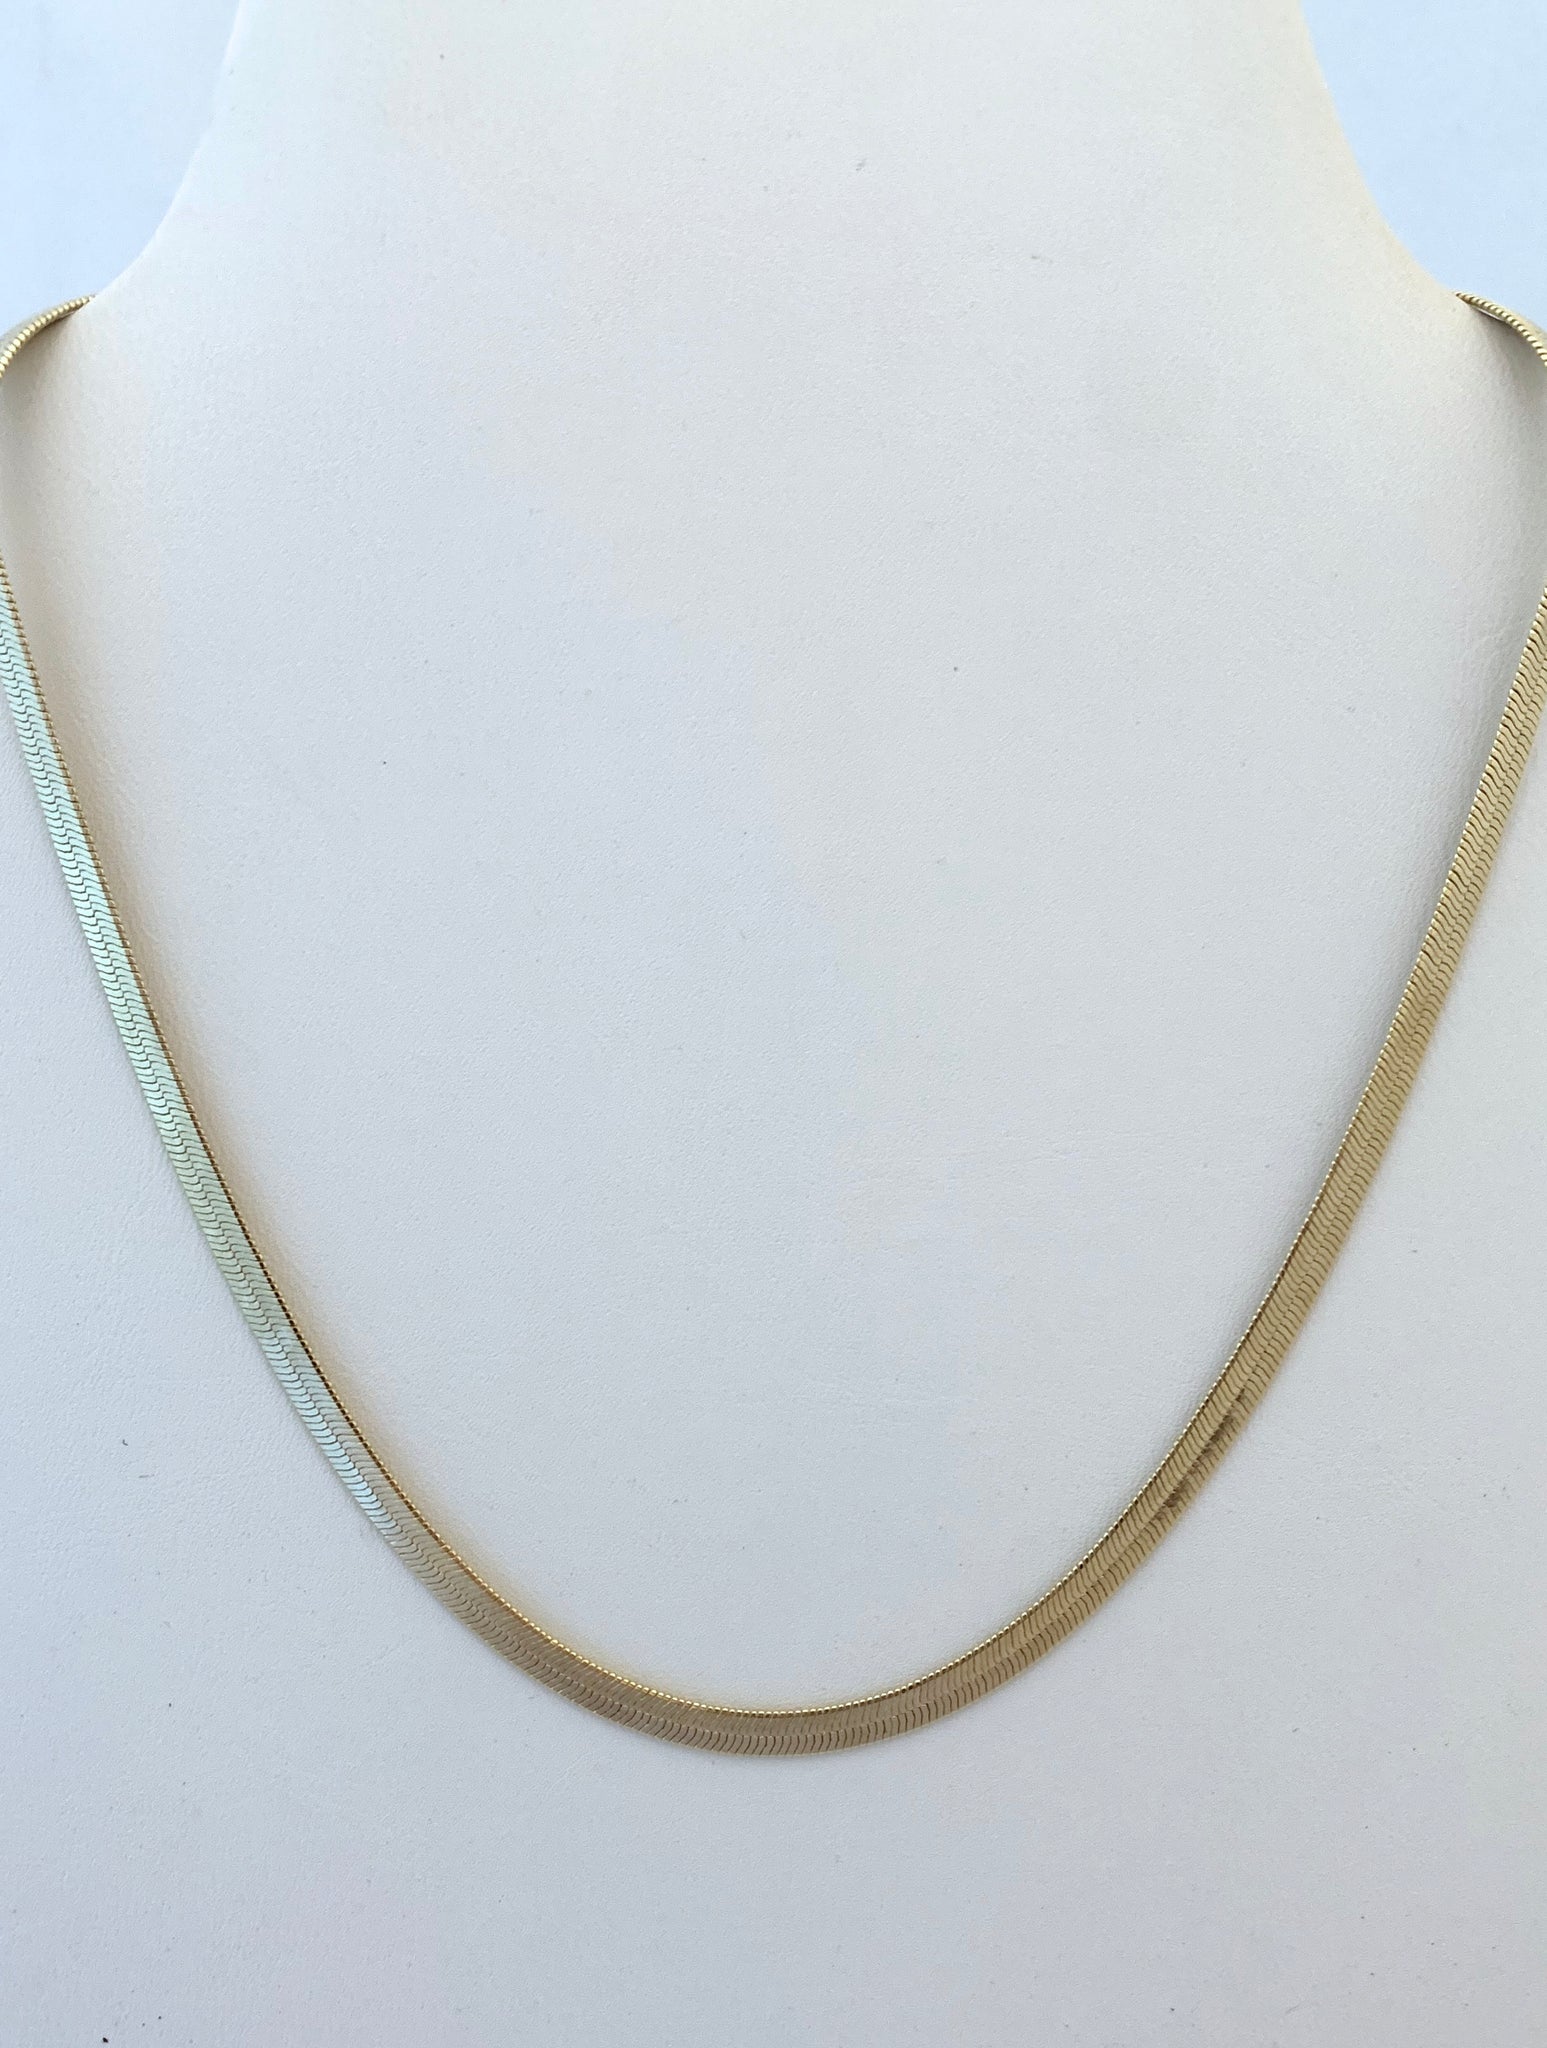 Gold Snake Chain Necklace - Medium Size Link